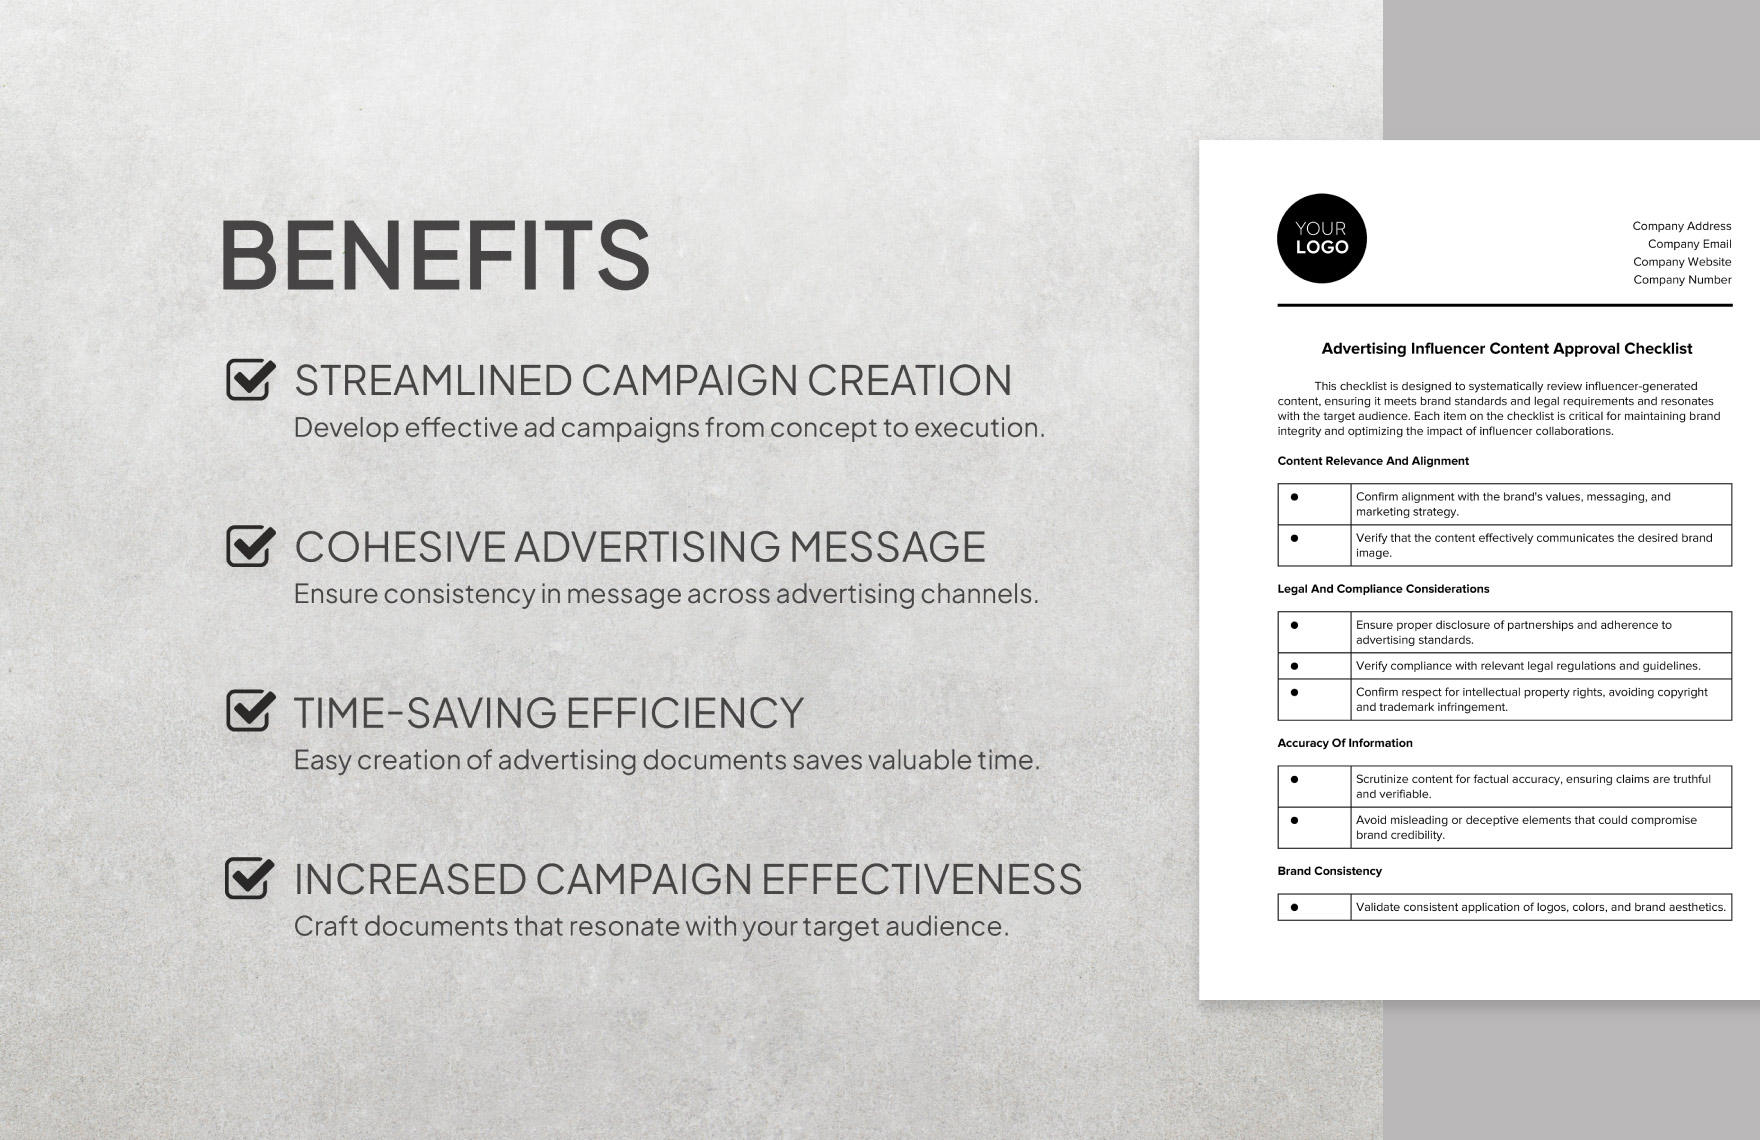 Advertising Influencer Content Approval Checklist Template